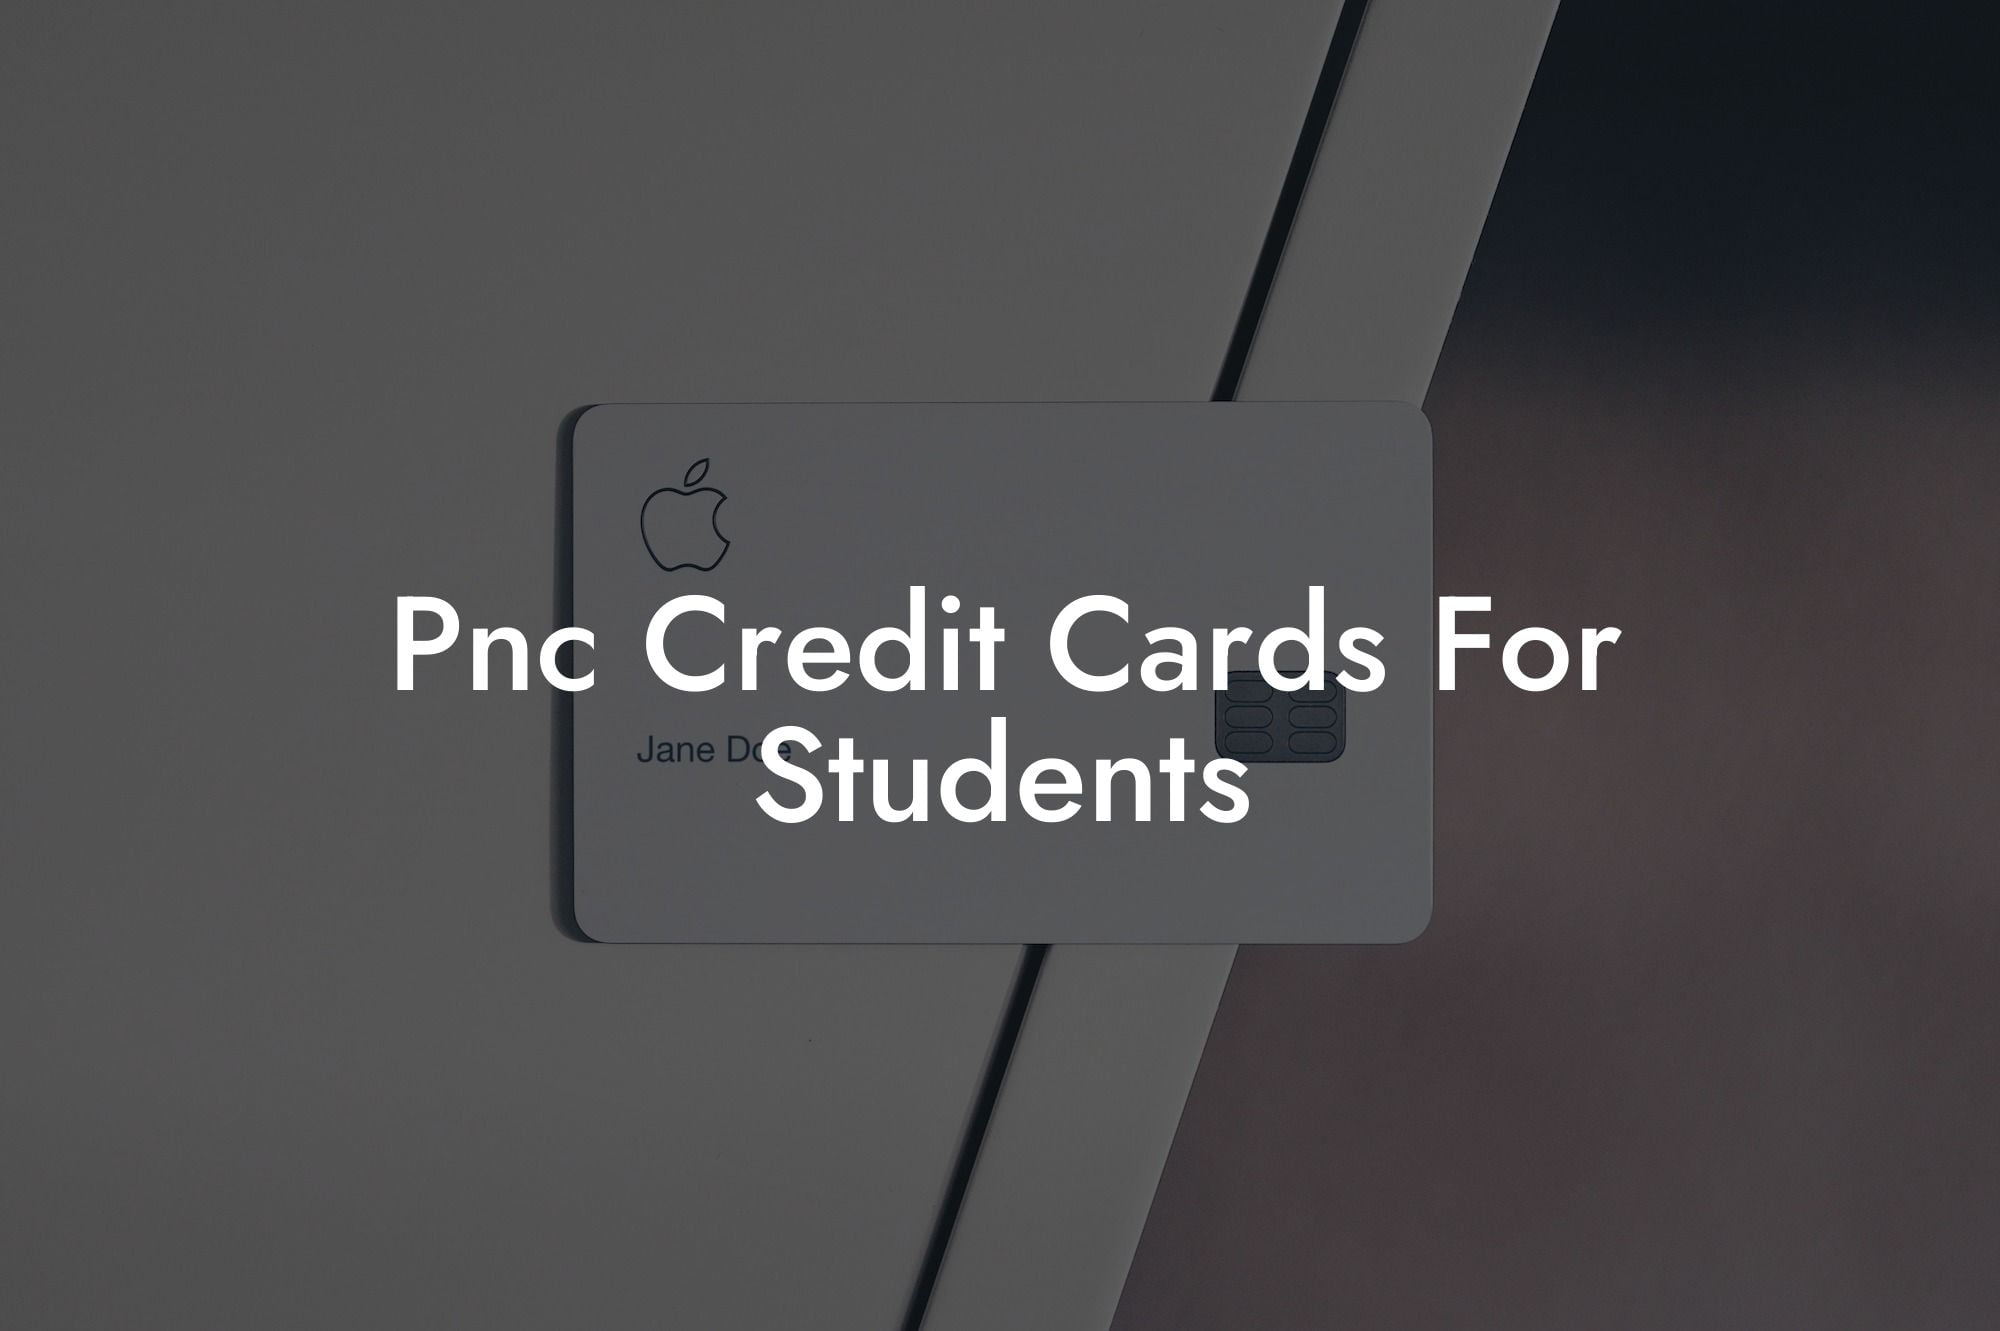 Pnc Credit Cards For Students